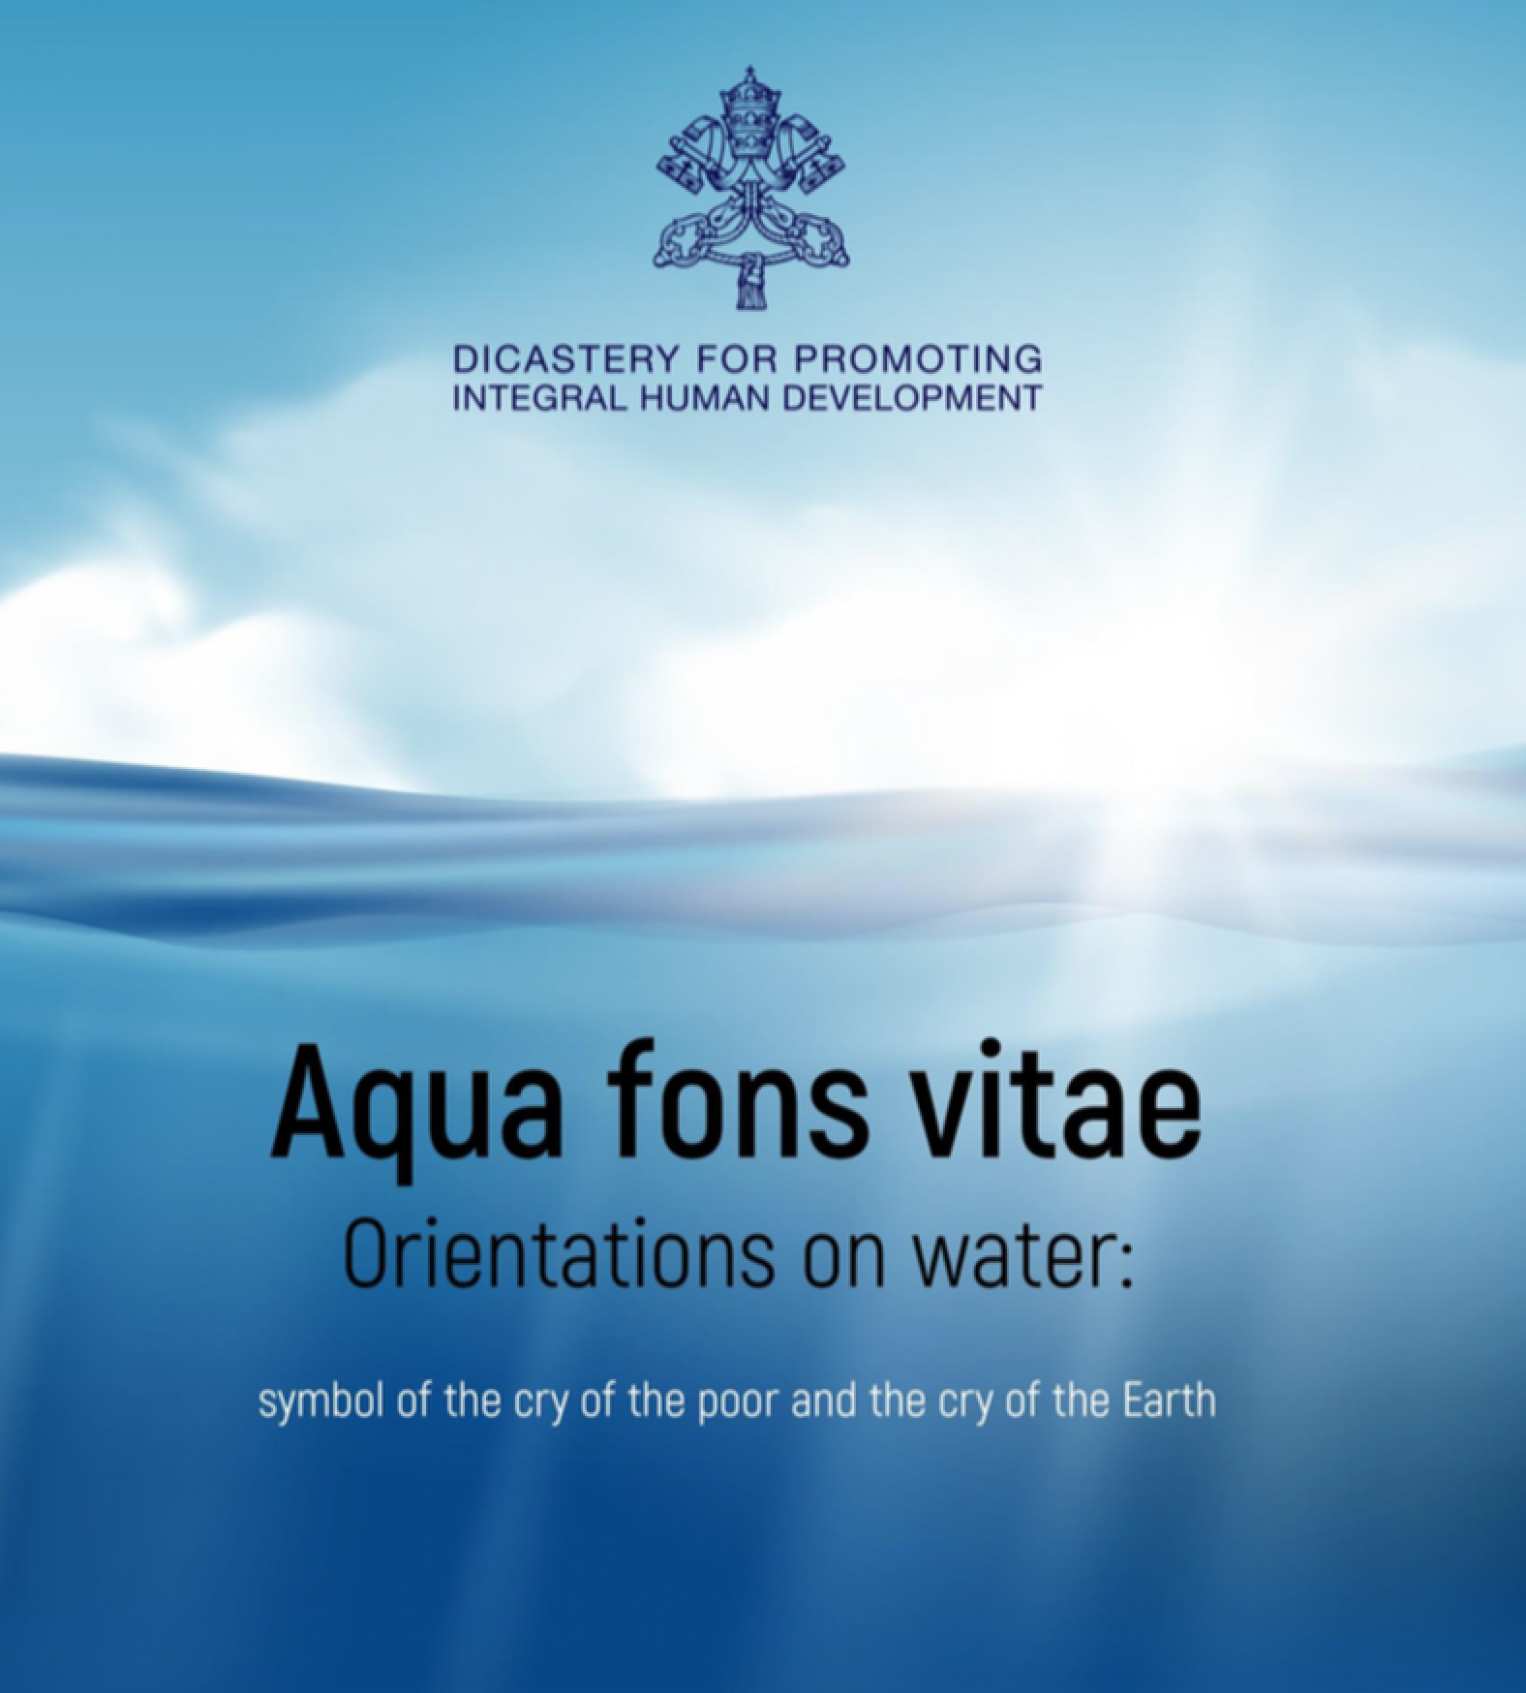 Aqua fons vitae. Orientations on Water, symbol of the cry of the poor and the cry of the Earth